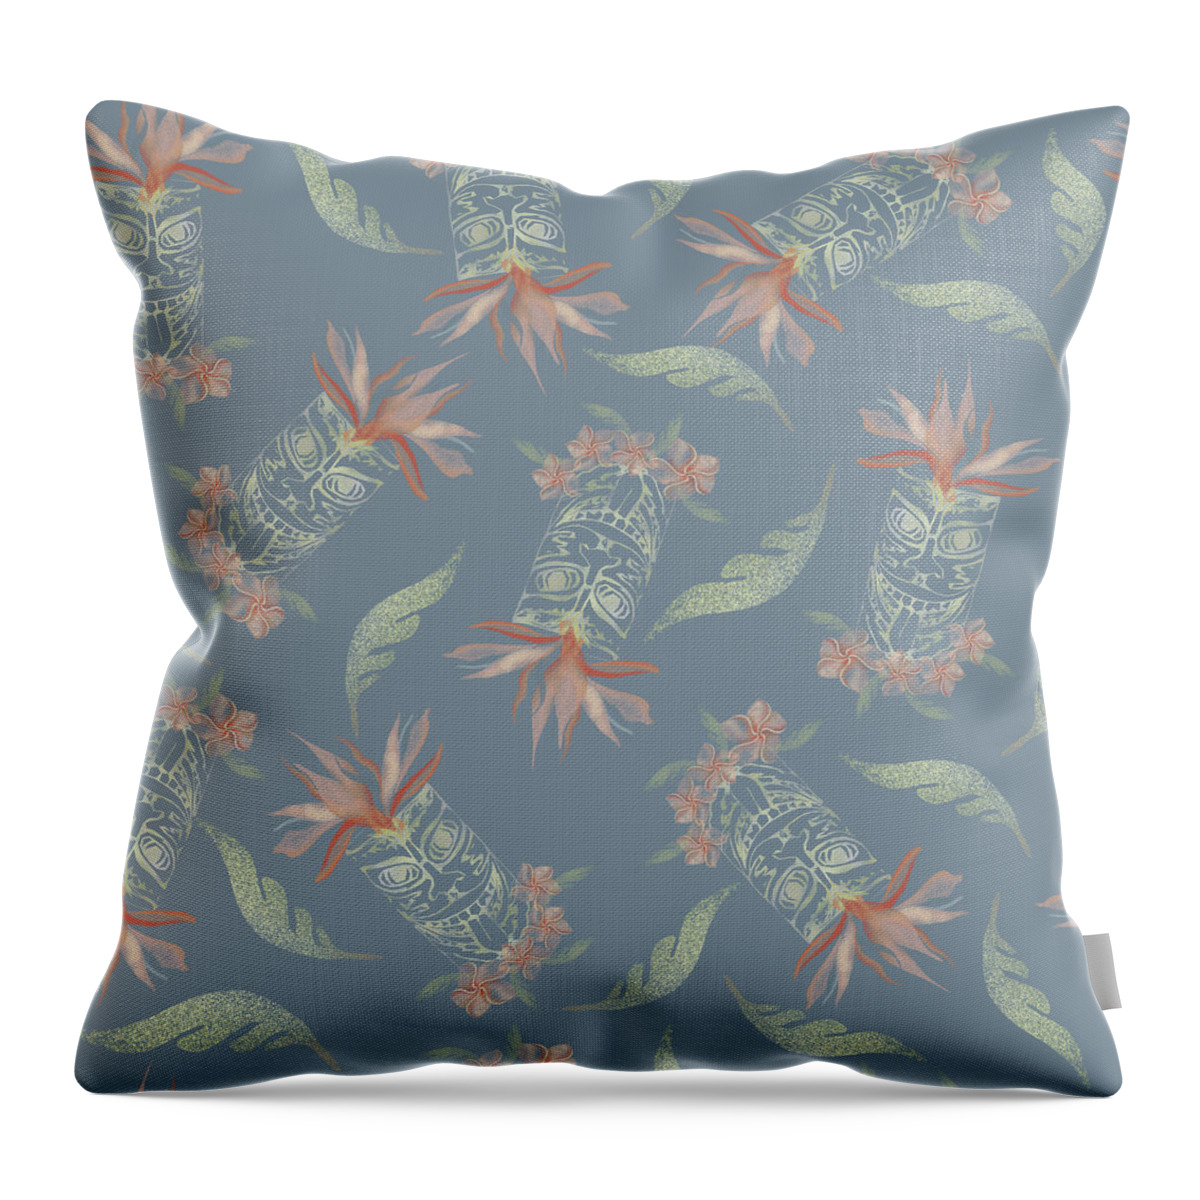 Tiki Throw Pillow featuring the digital art Tiki Floral Pattern by Sand And Chi